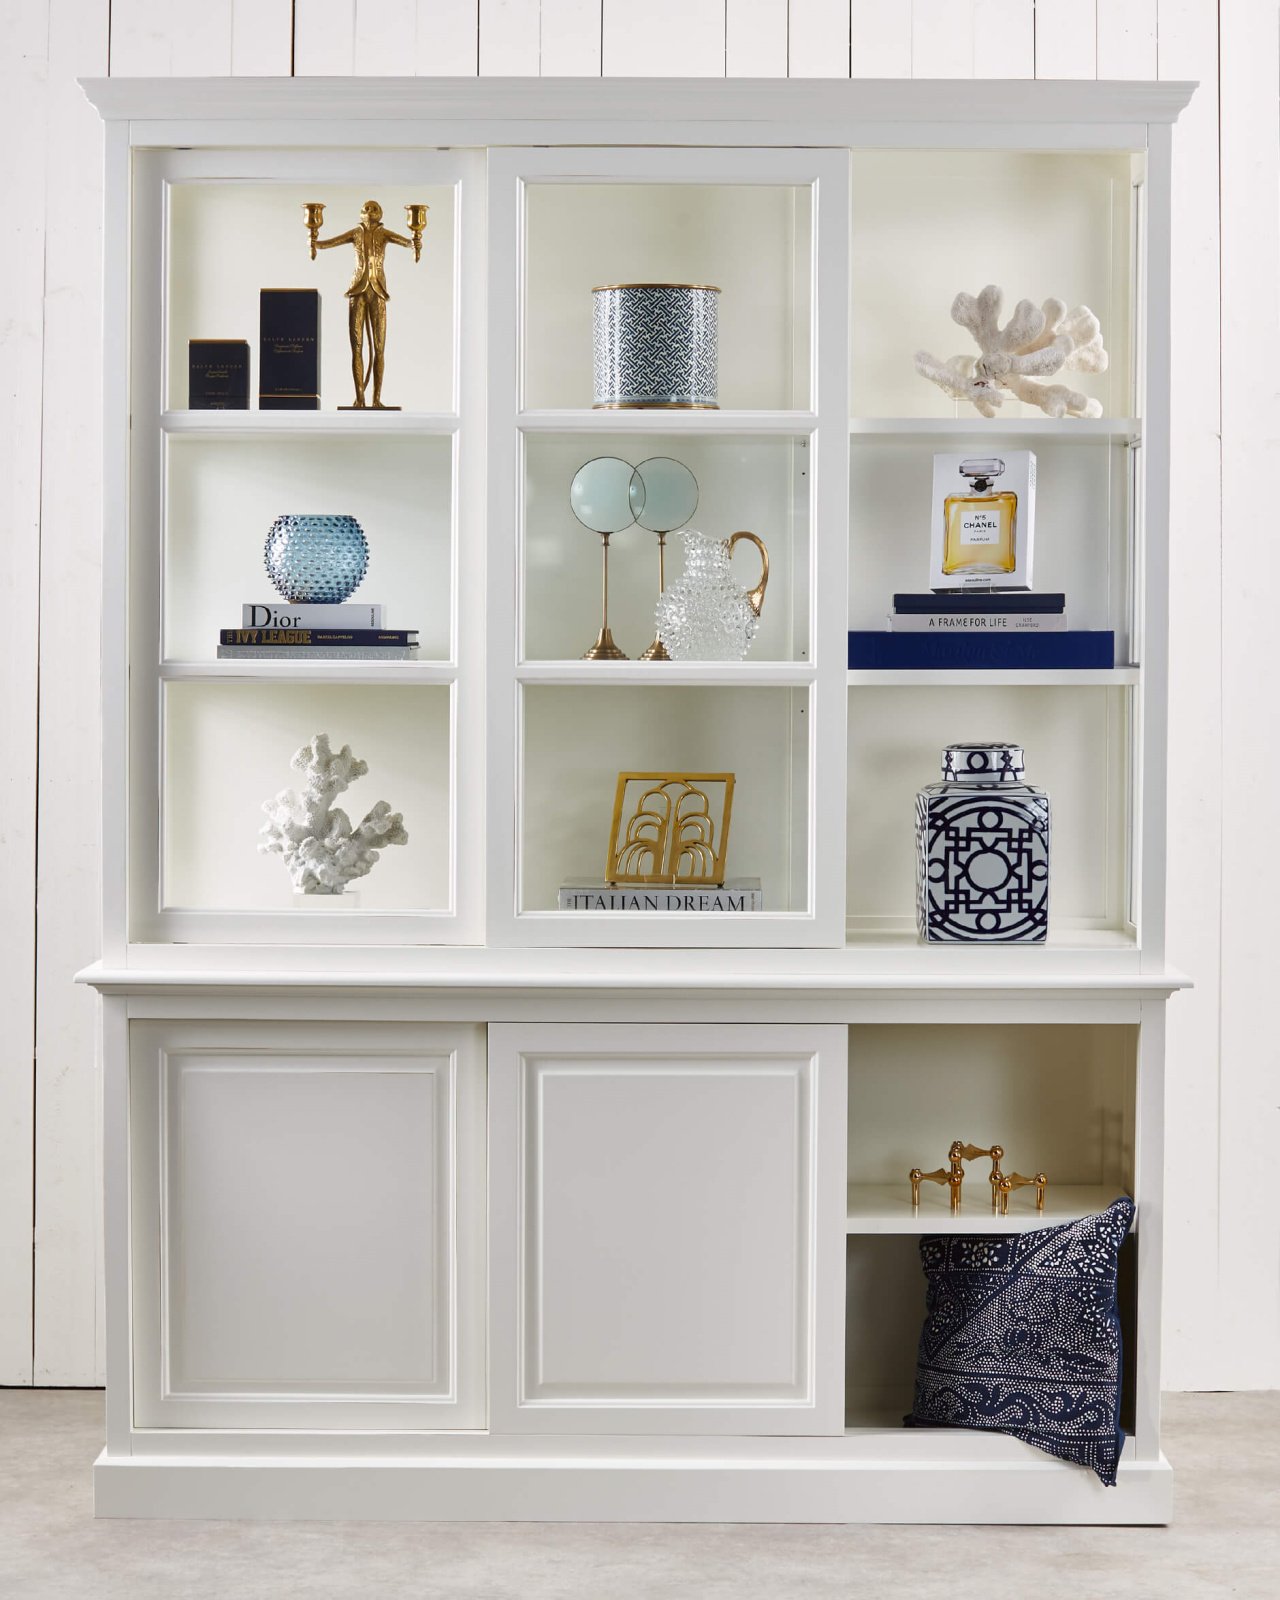 Assonet Display Cabinet Classic White